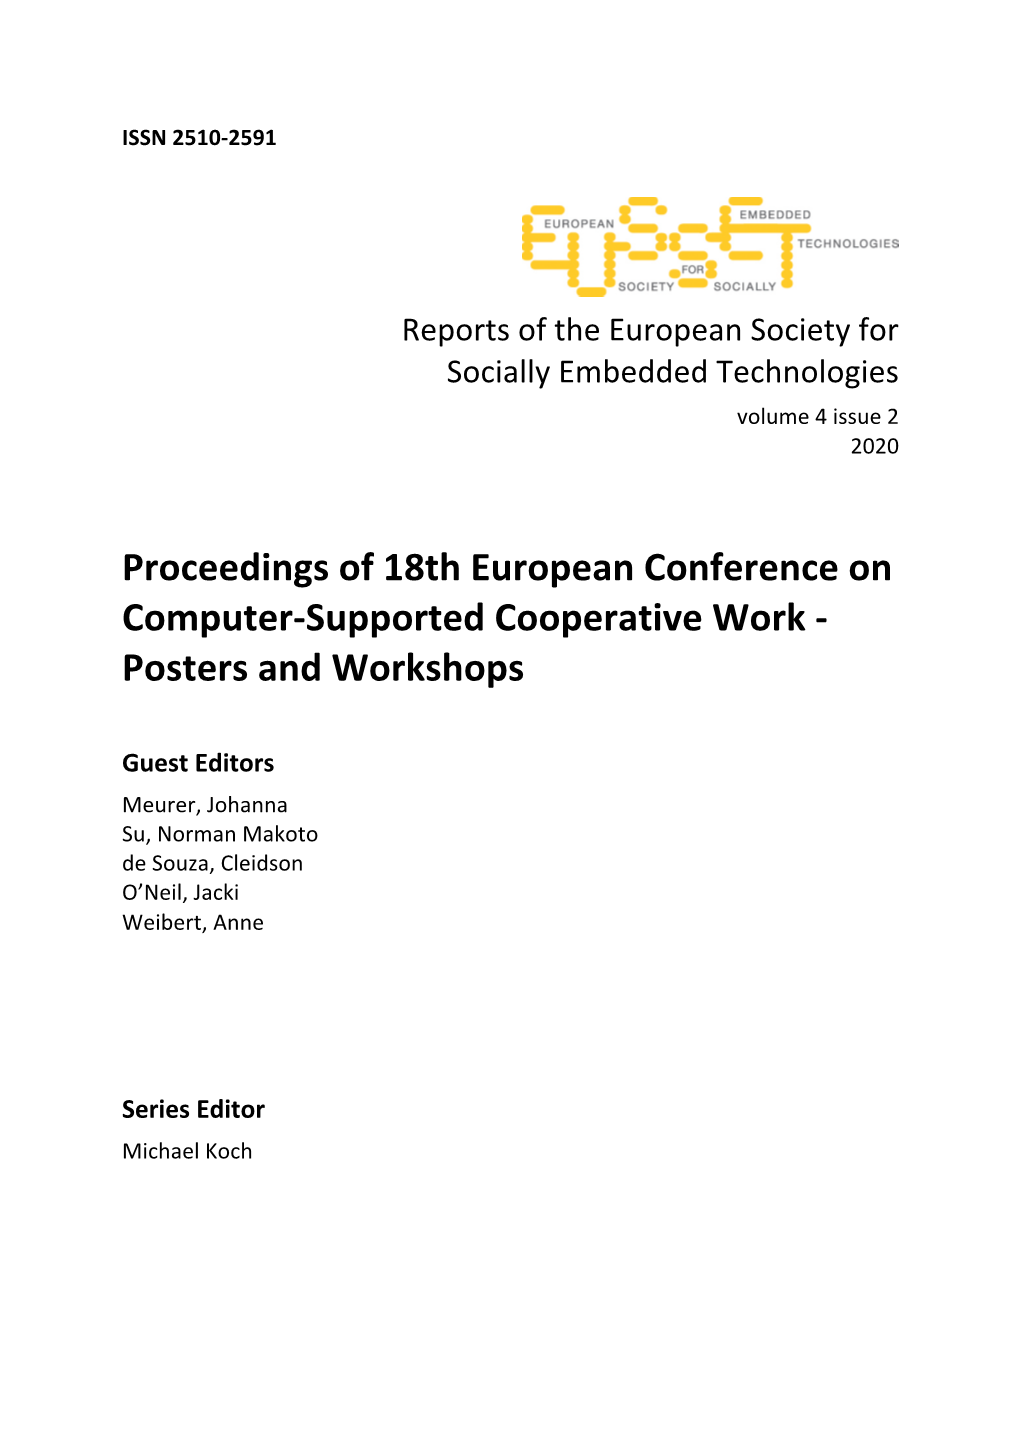 Posters and Workshops